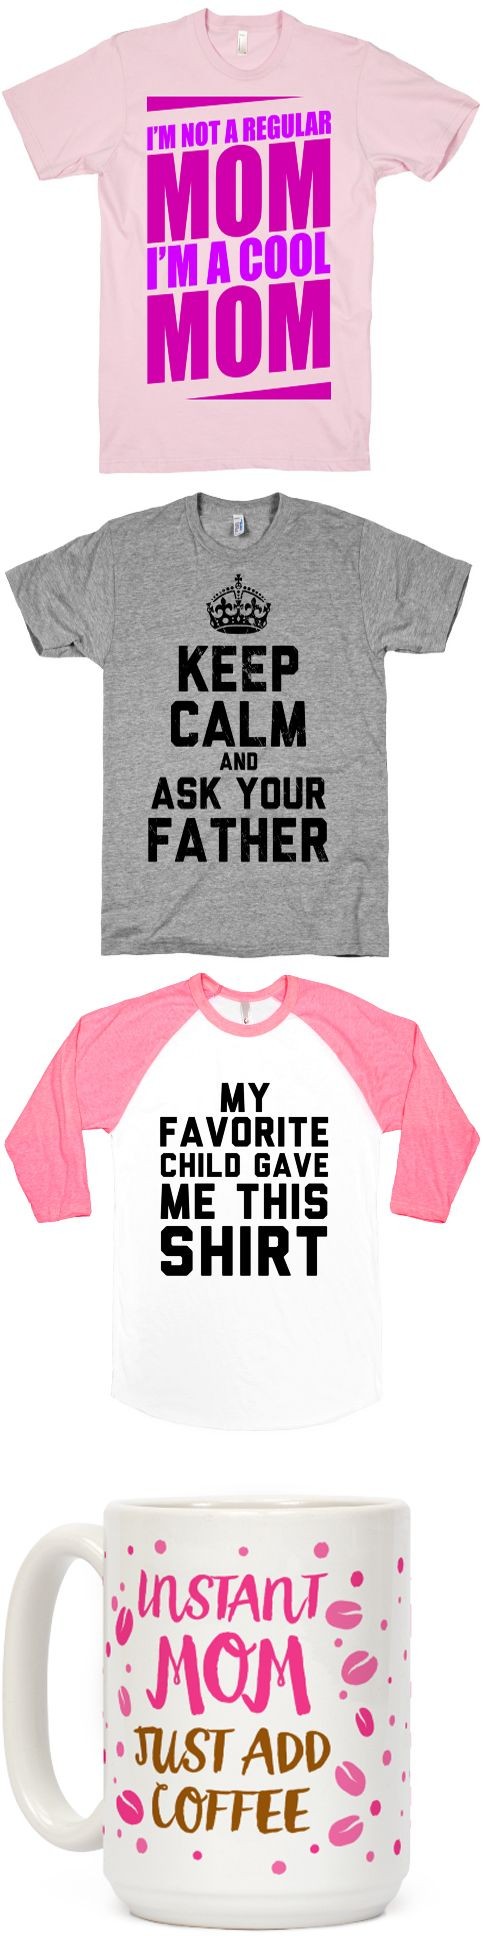 Find the perfect t for your mom